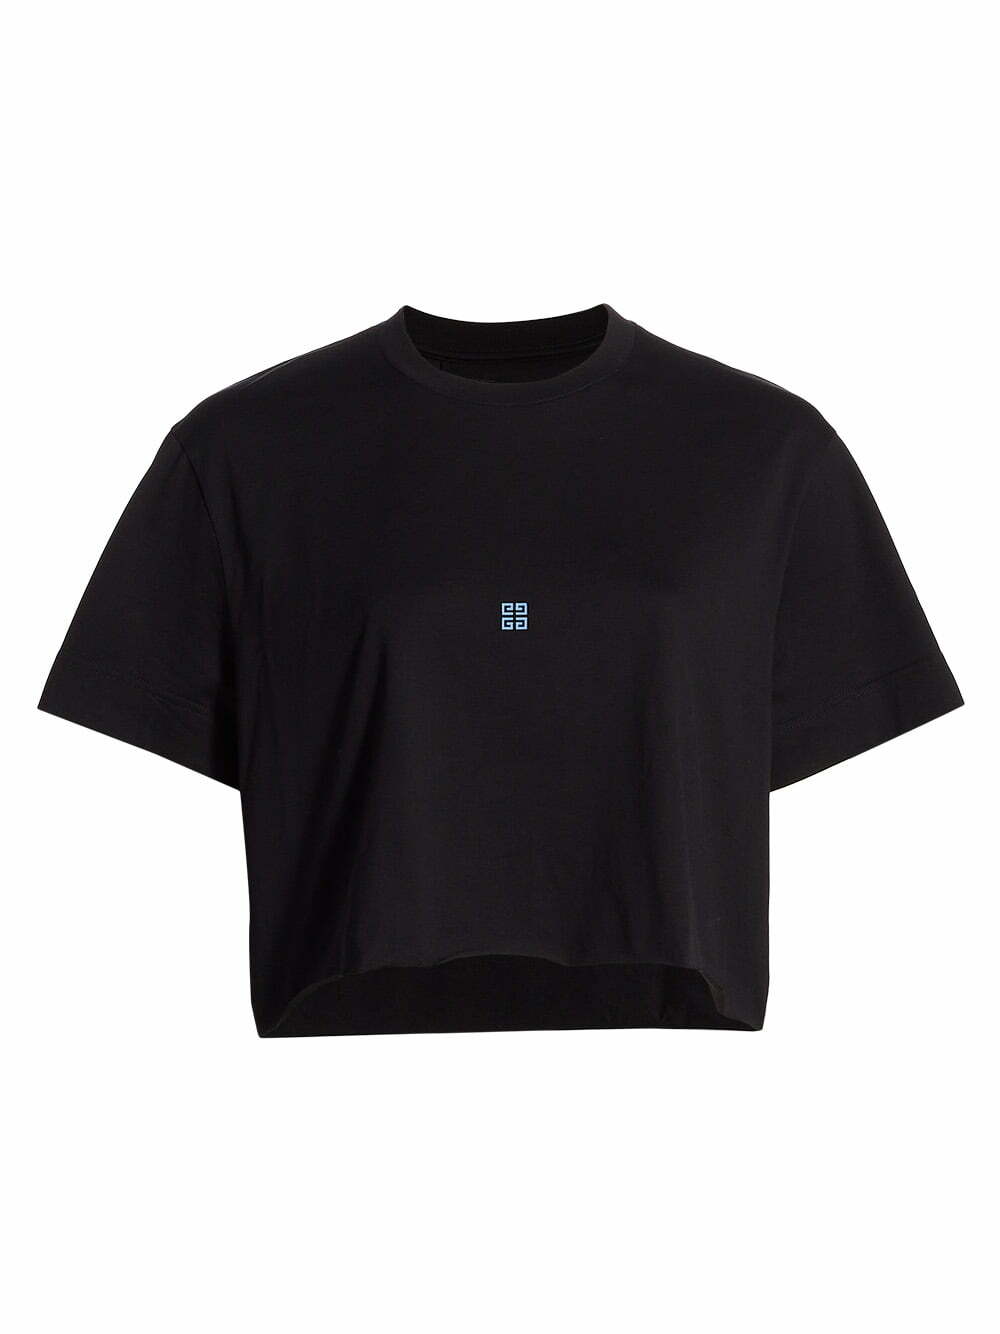 Givenchy Tee (Women's)